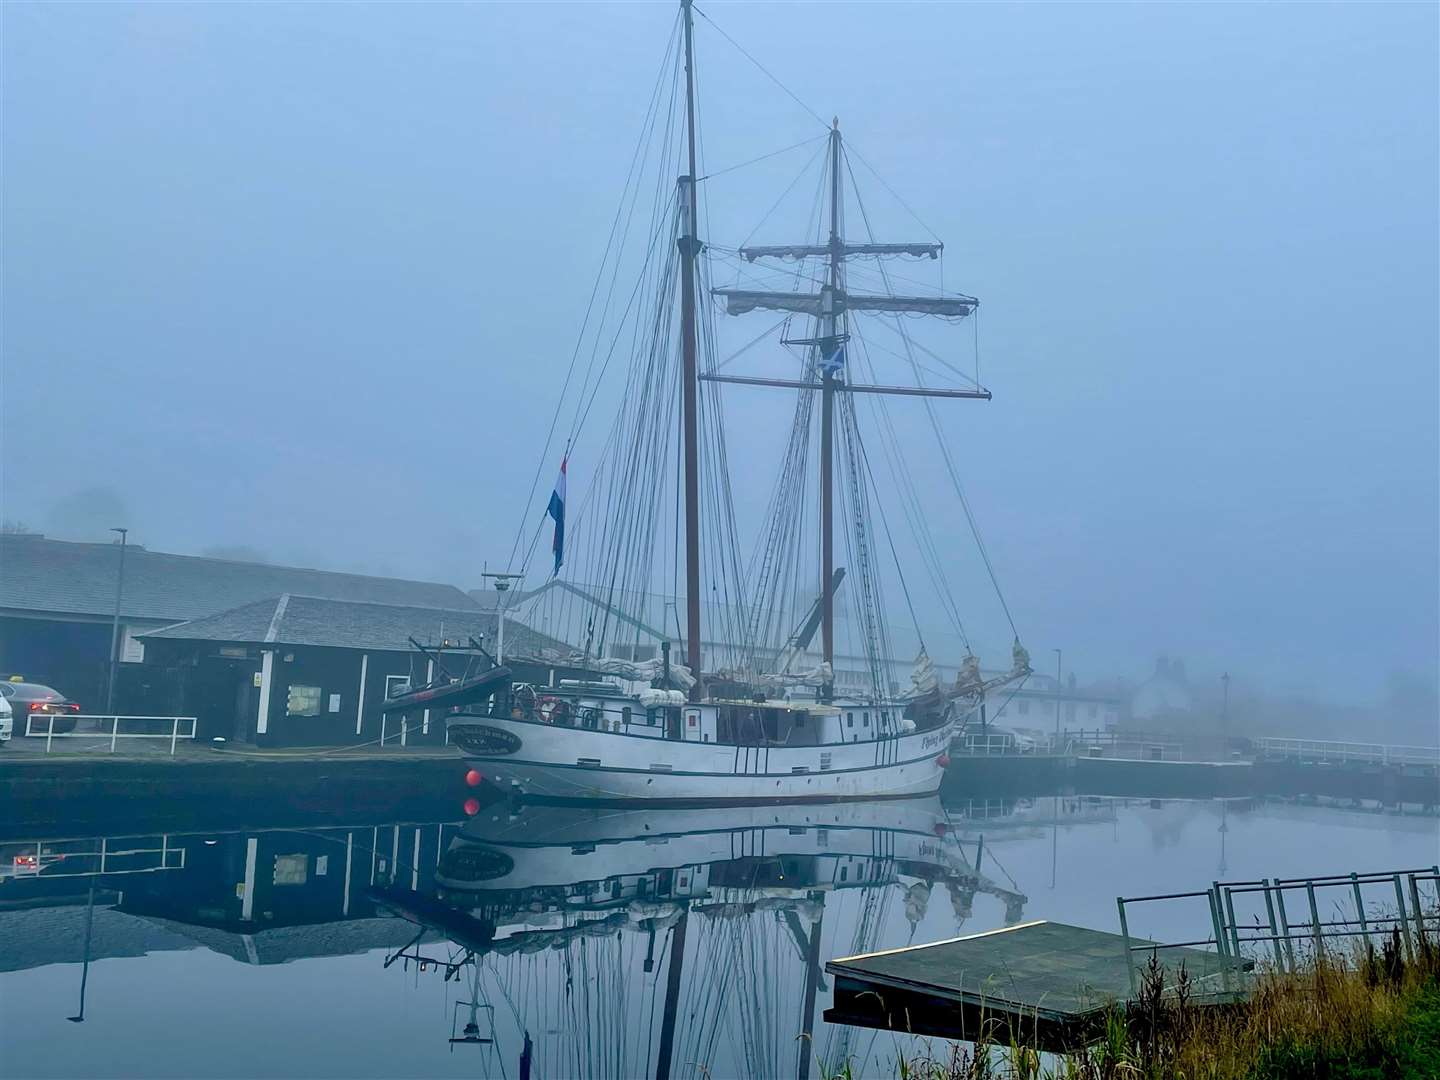 A ghostly looking Fiying Dutchman at the Caley Marina. Picture: Aitken Paton, Inverness